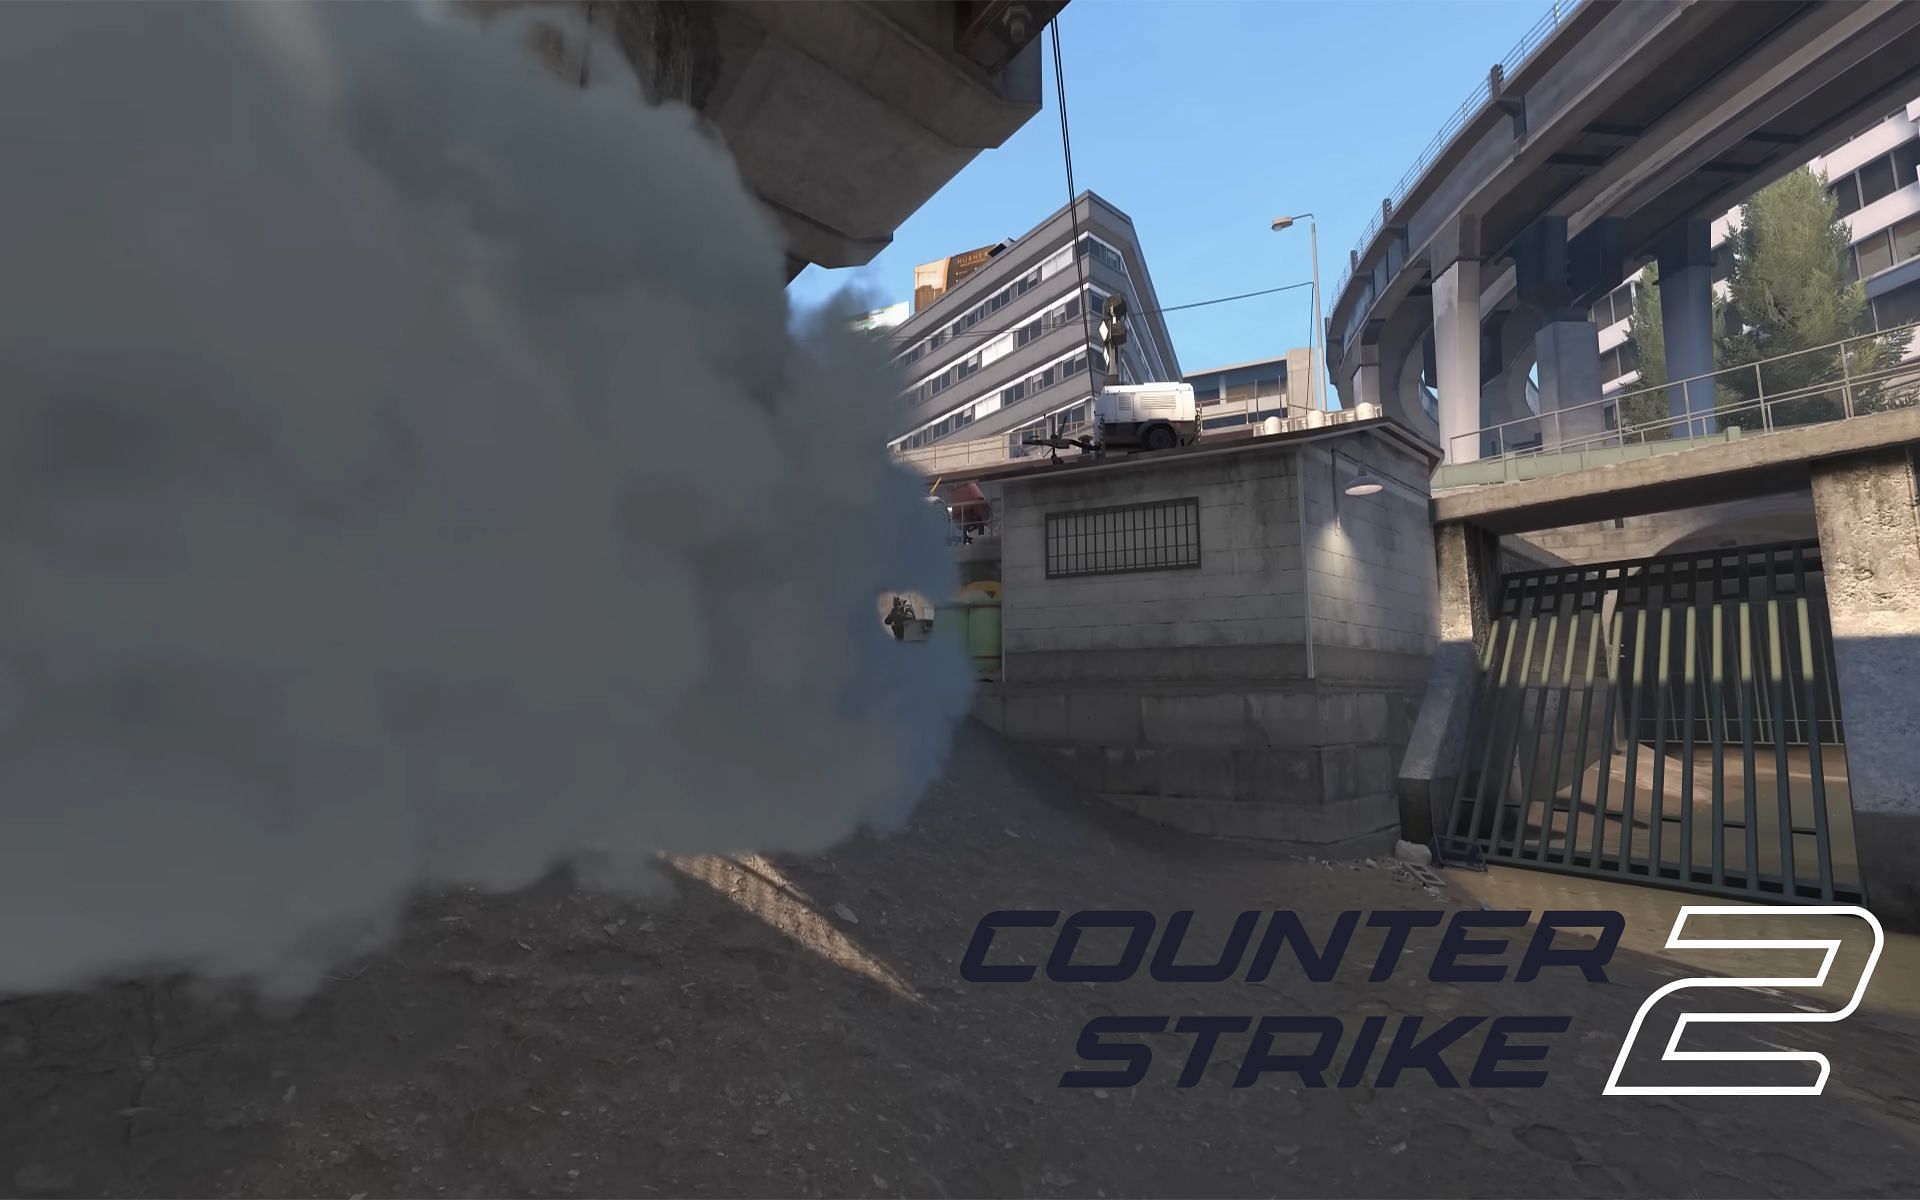 Using smokes and HE grenades to trick enemies in Counter-Strike 2 (Image via Valve)